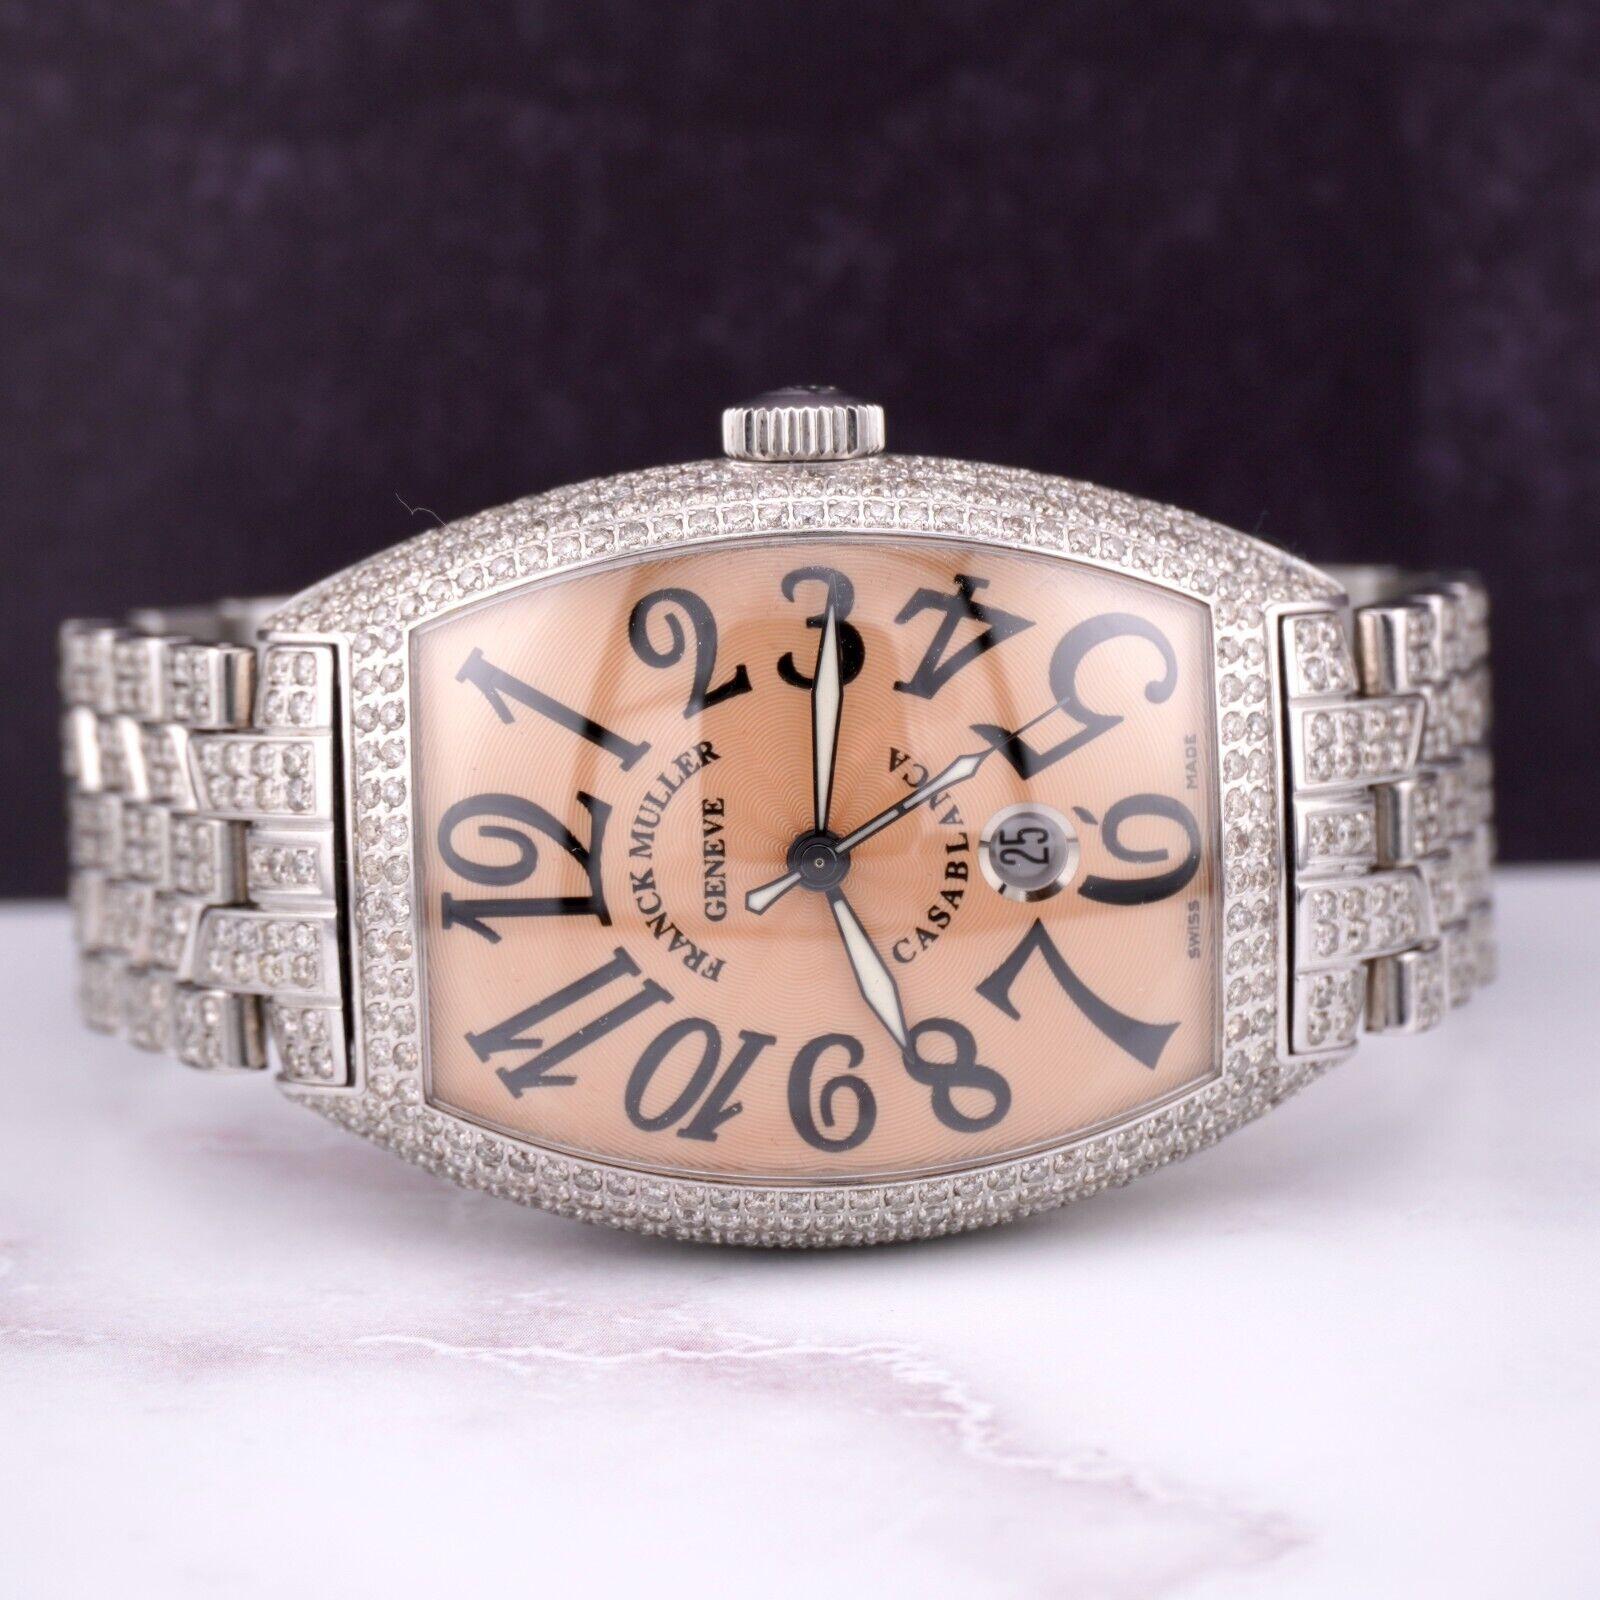 Franck Muller Casablanca Jumbo 39mm Watch. A Pre-owned watch w/ Gift Box. The Watch Itself is Authentic and Comes with Authenticity Card. Watch Reference is 8880 and is in Excellent Condition (See Pictures). The dial color is Salmon is and material